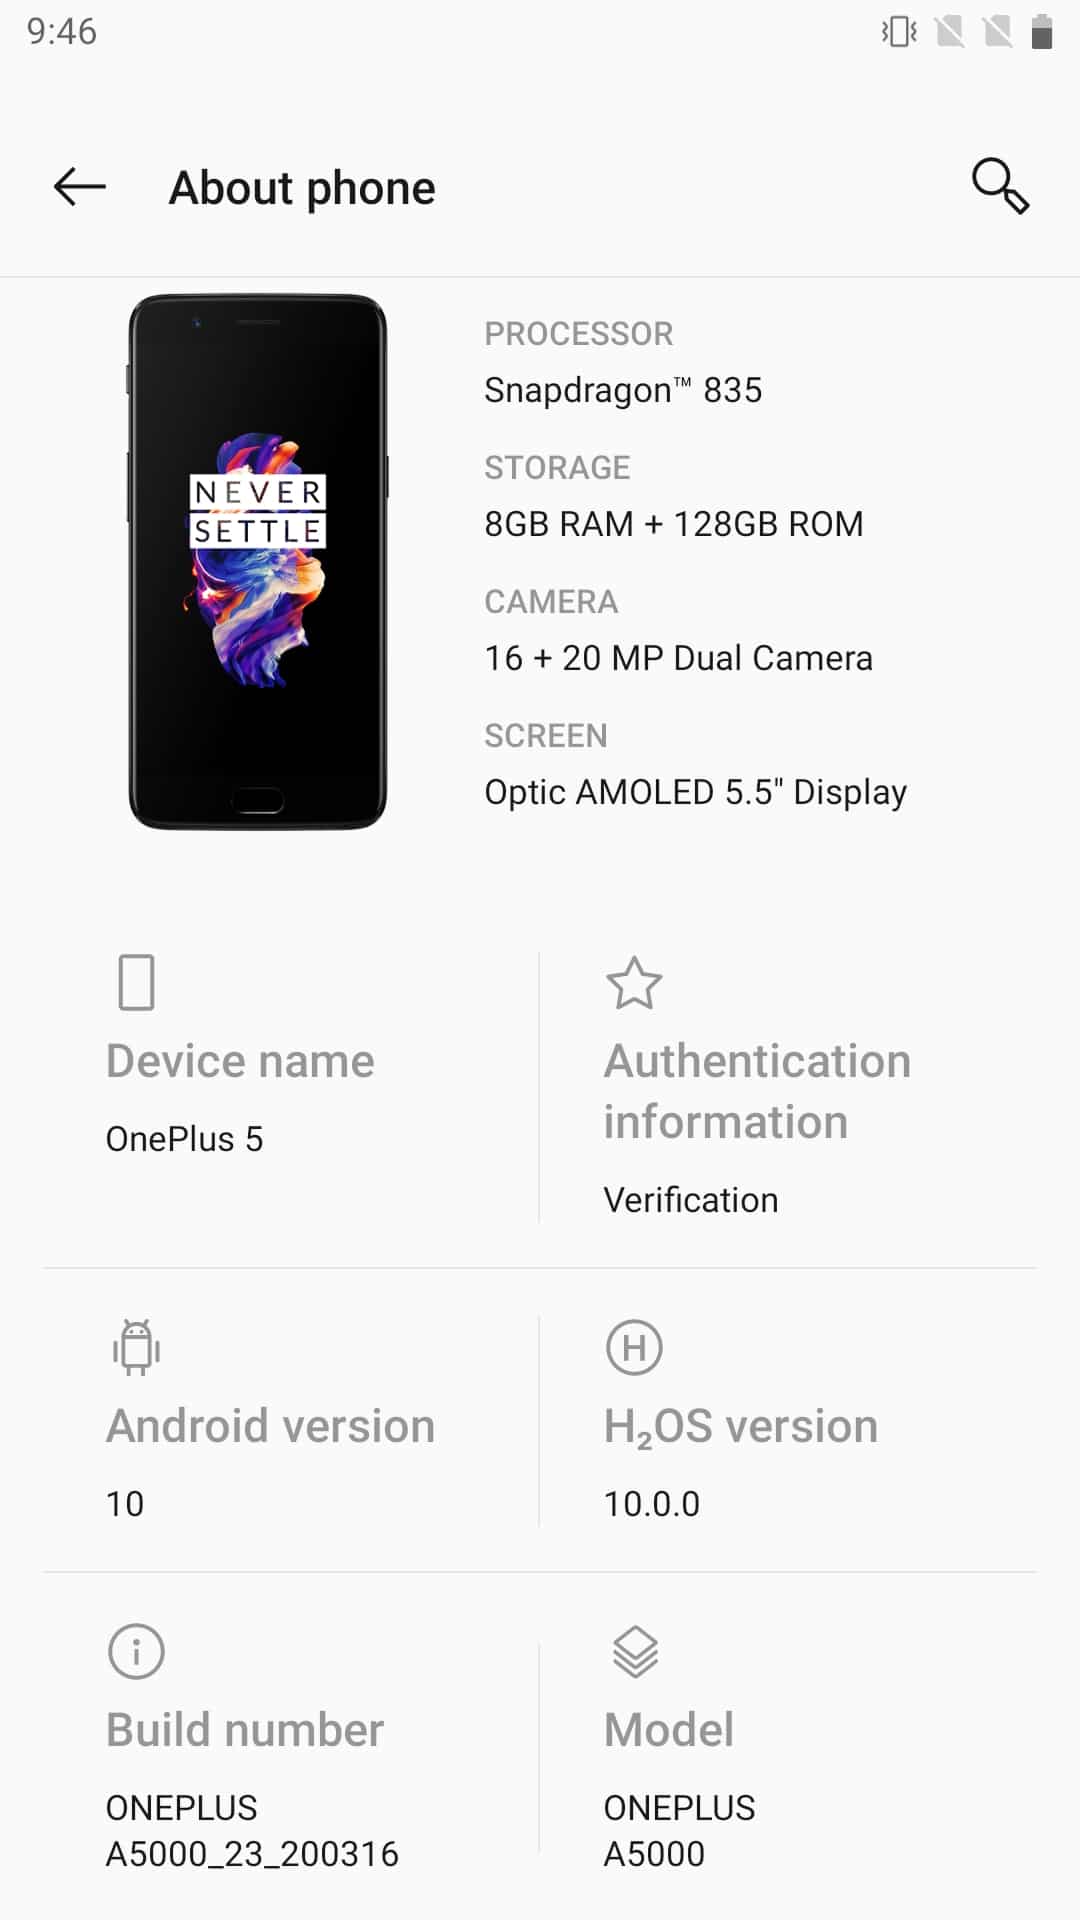 HydrogenOS based on Android 10 for Oneplus 5 and Oneplus 5T